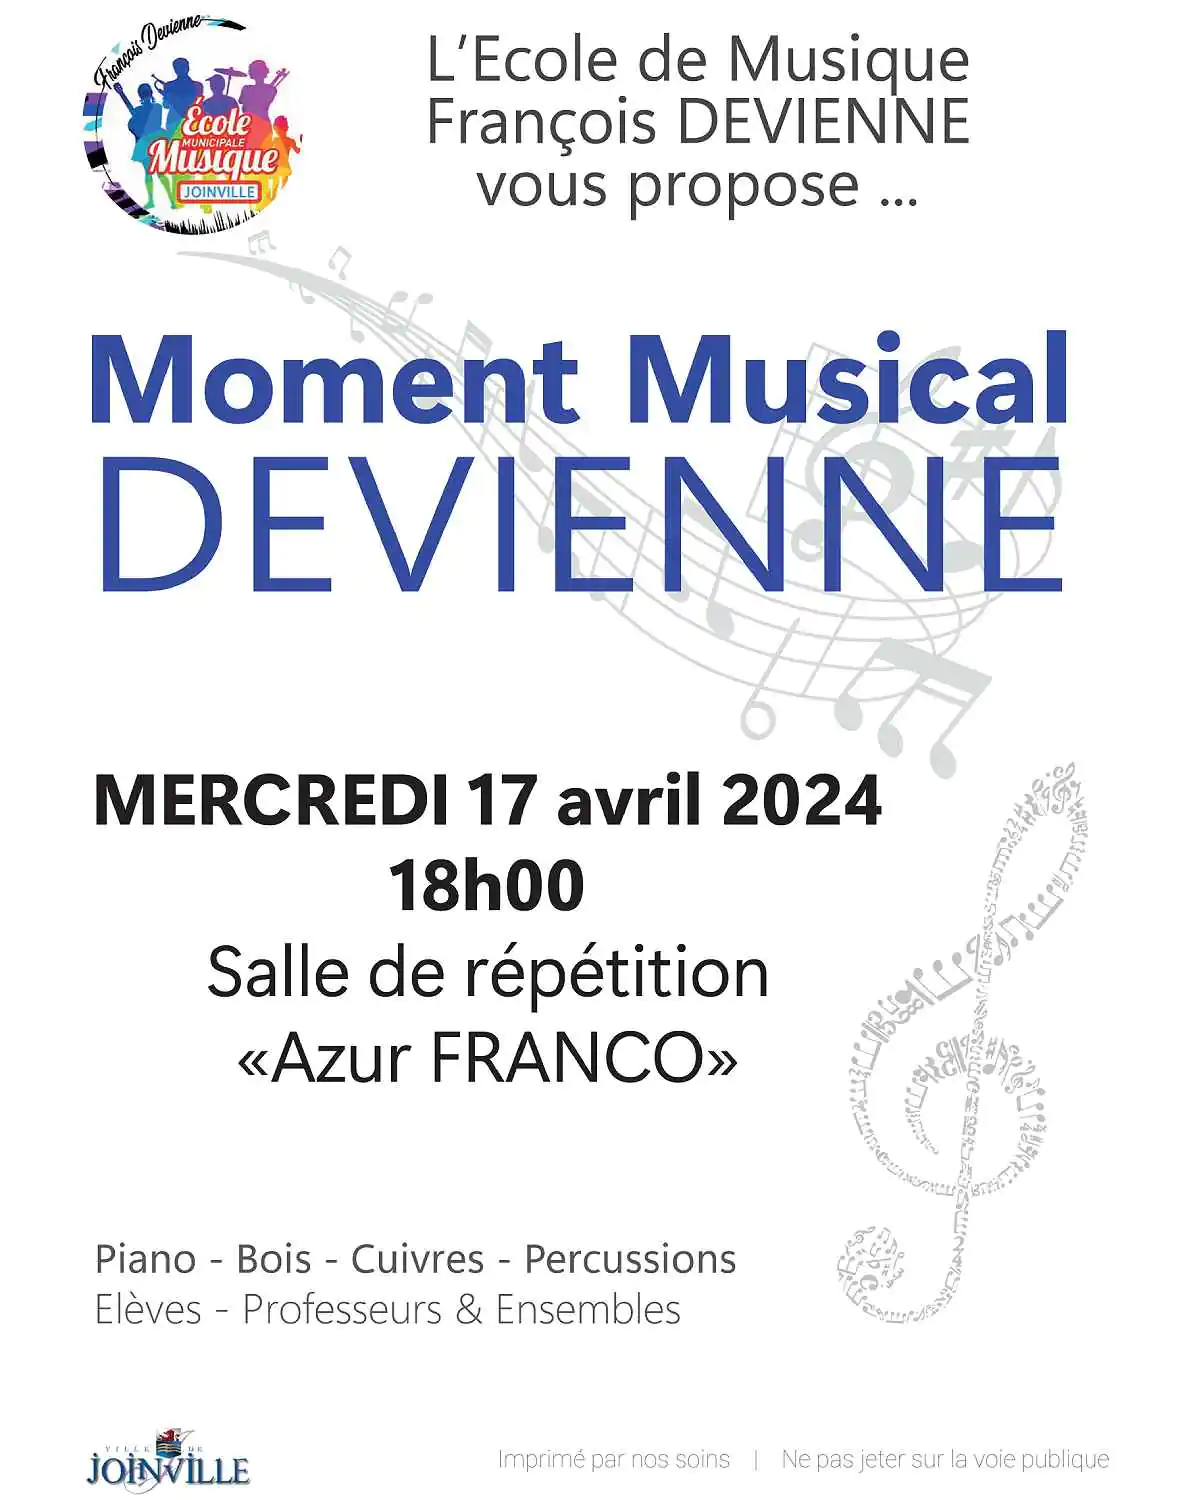 MOMENT MUSICAL DEVIENNE